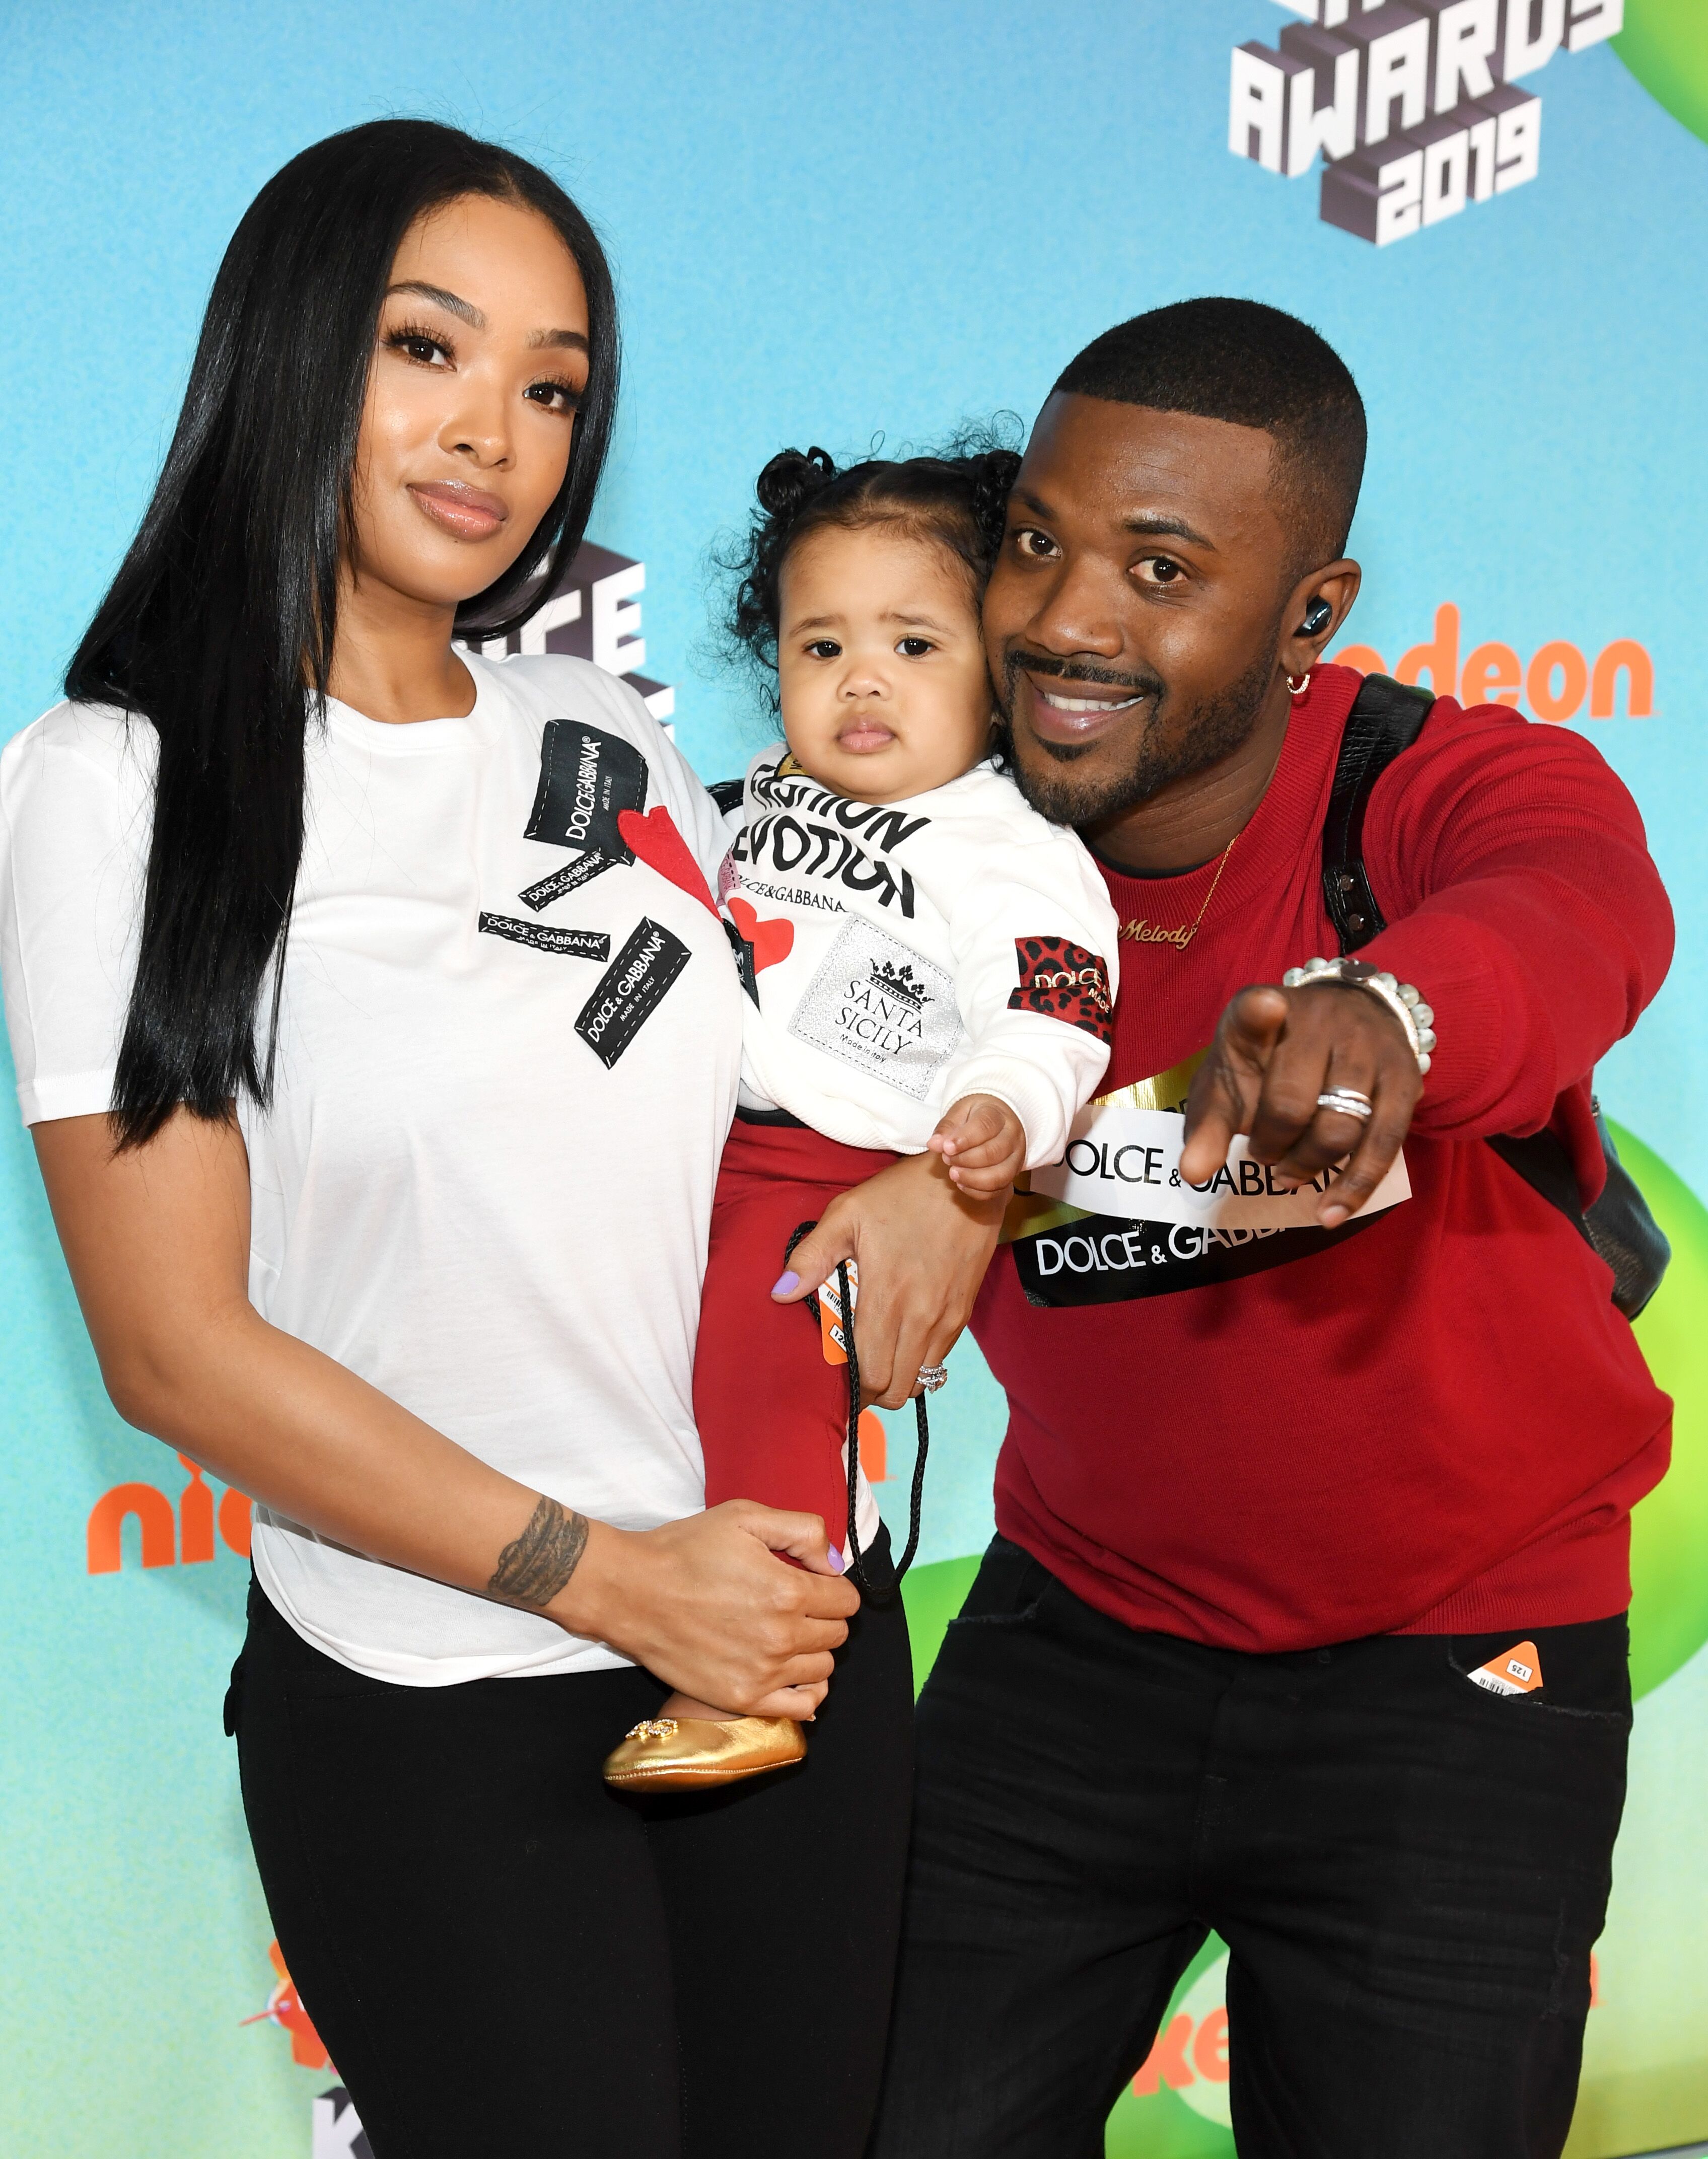 Rapper Ray J and his wife Princess Love with daughter Melody at Nickelodeon premiere/ Source: Getty Images